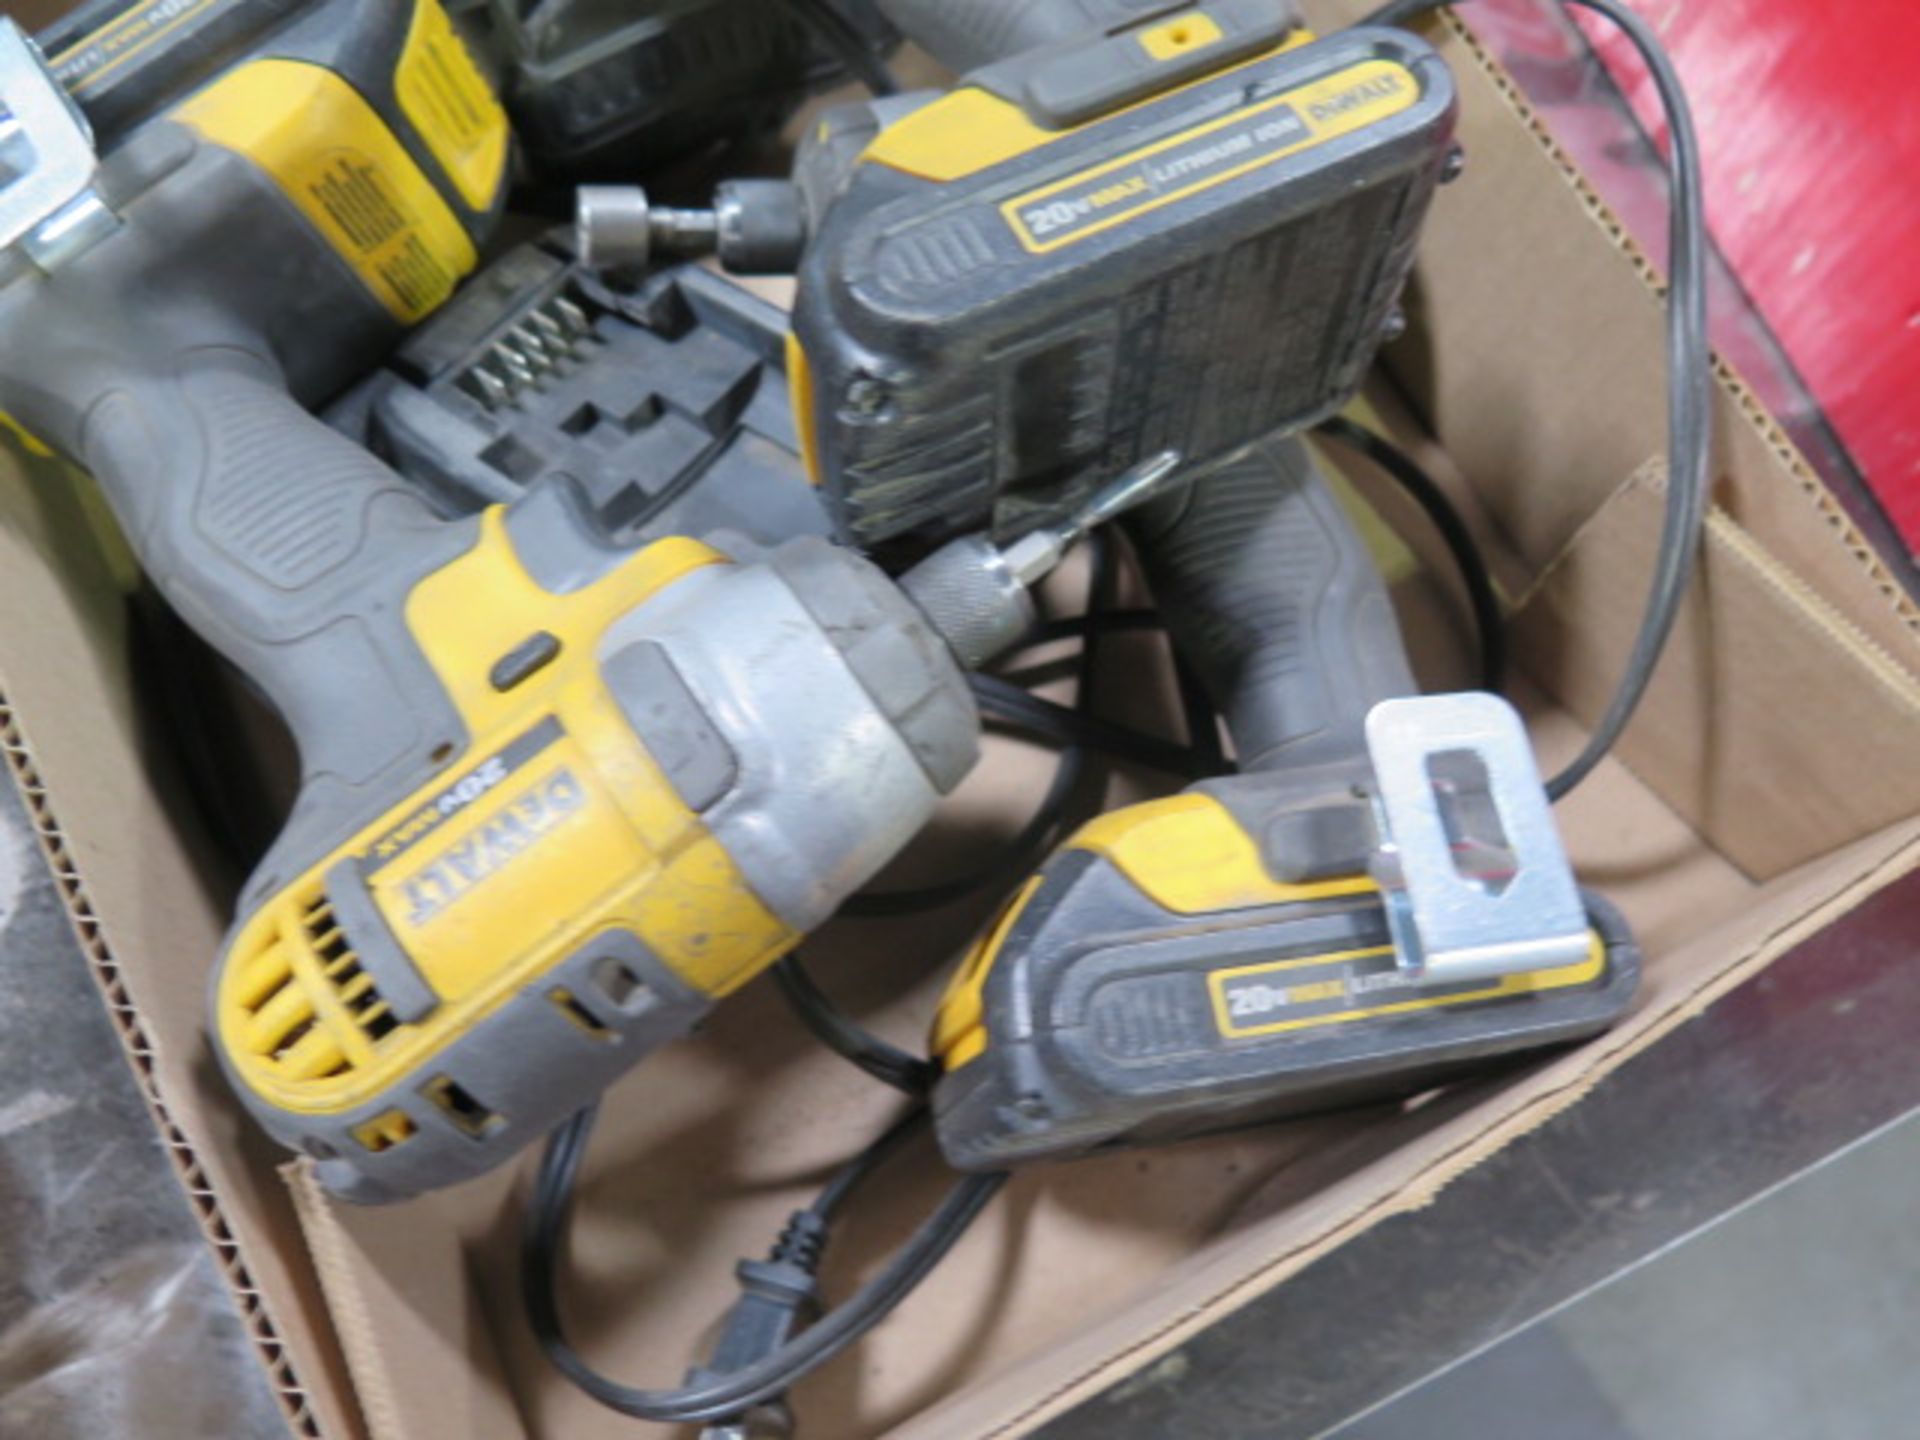 DeWalt 20 Volt Cordless Drills and Nut Drivers w/ Charger (SOLD AS-IS - NO WARRANTY) - Image 3 of 4